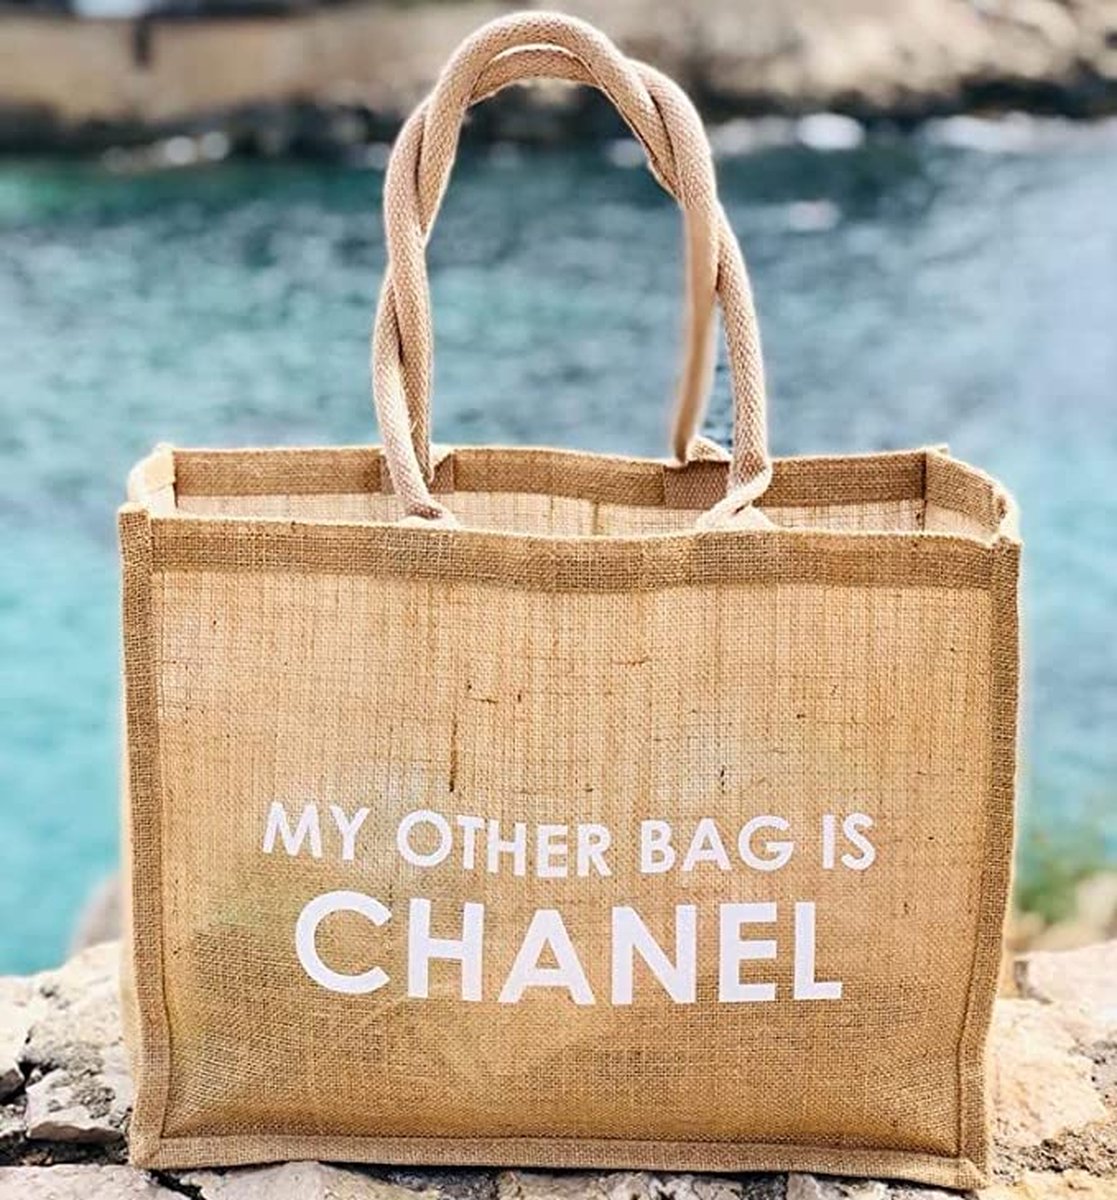 Jute Shopper My other bag is Chanel Shopping or Beach Bag 42 x 33